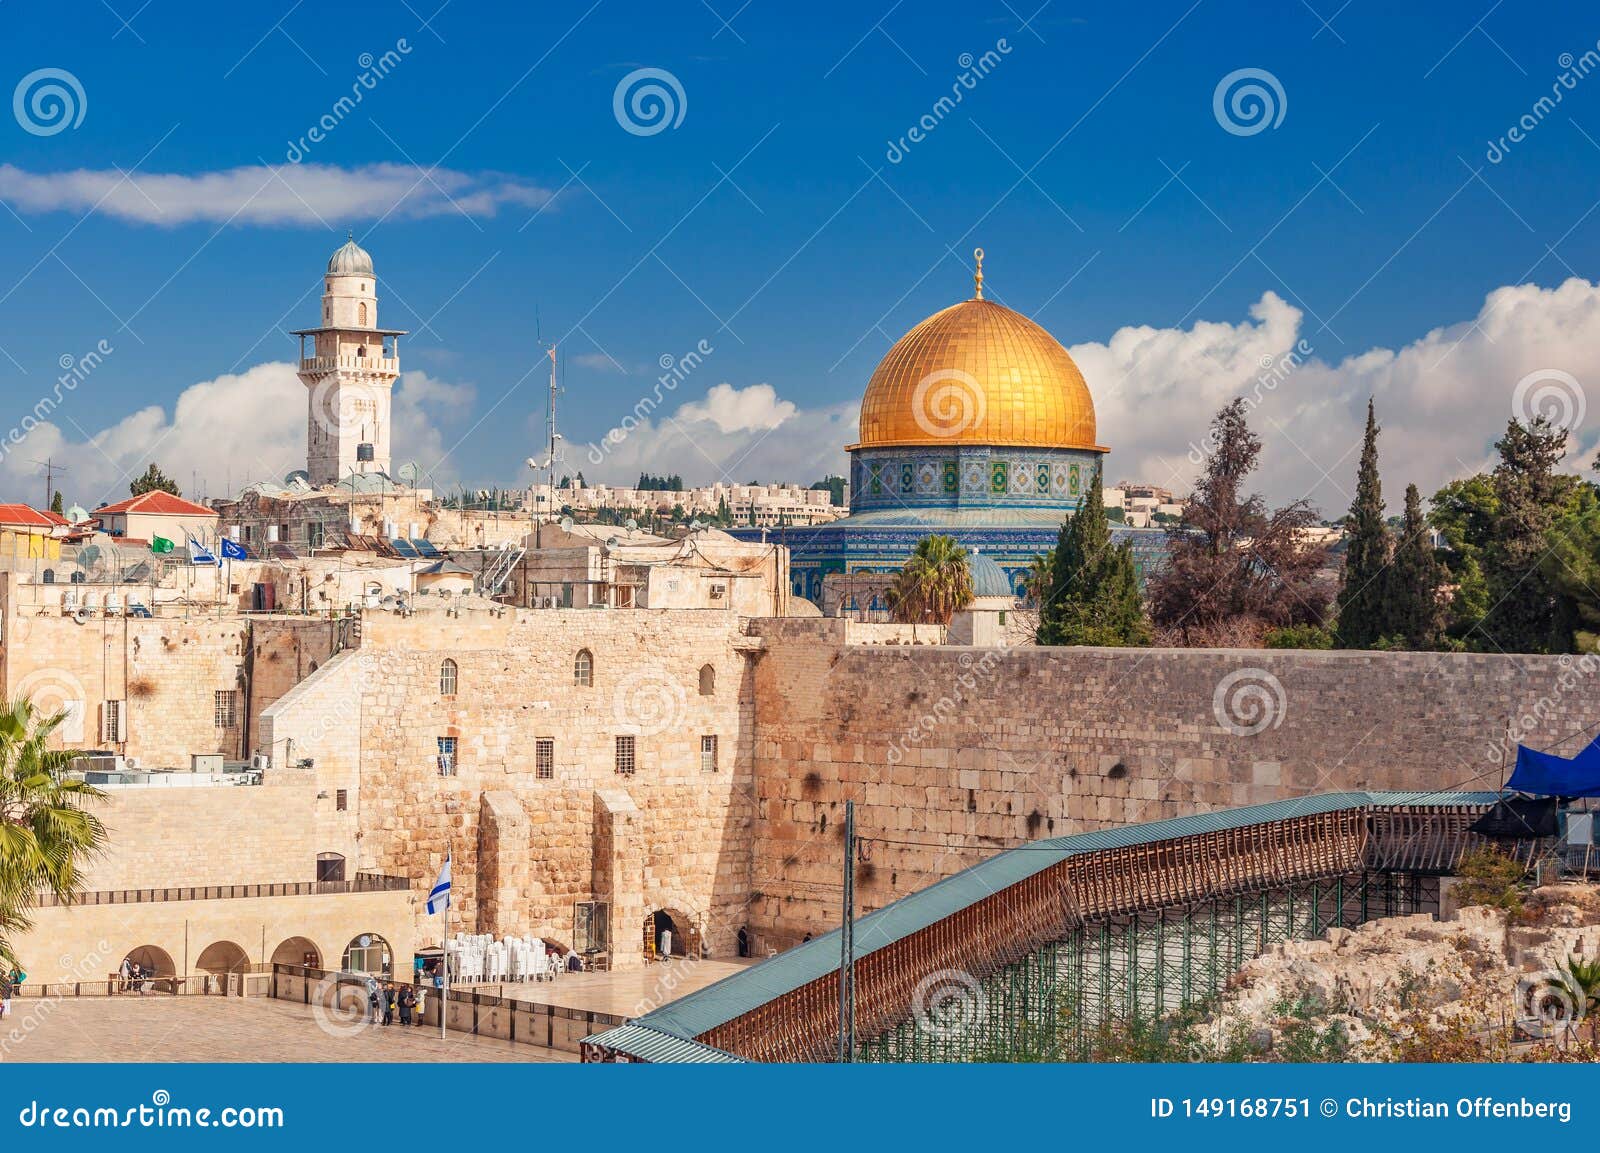 western wall with the iconic dome of the rock above